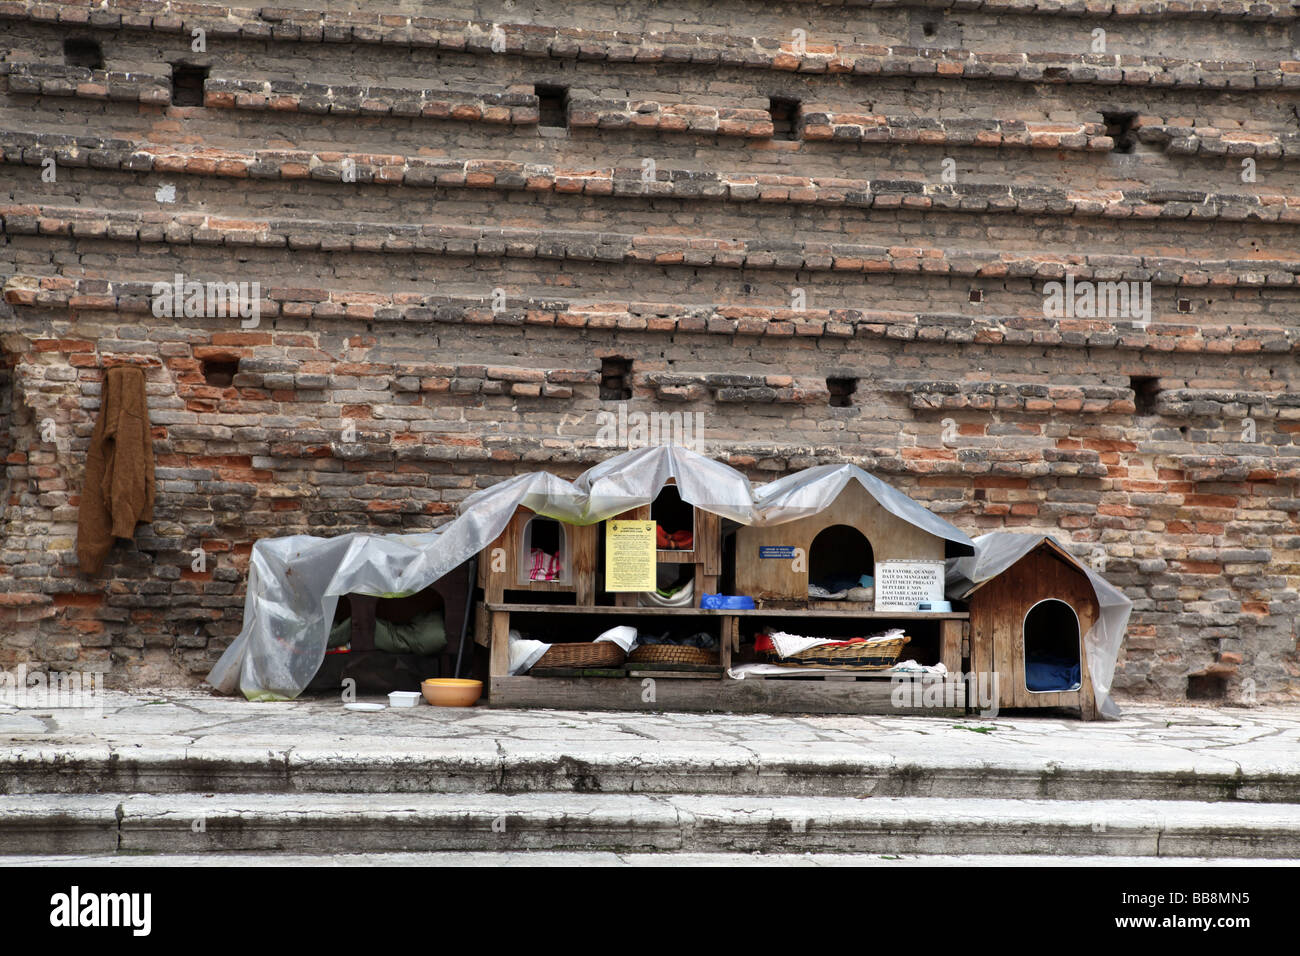 Venice Cat High Resolution Stock Photography and Images - Alamy